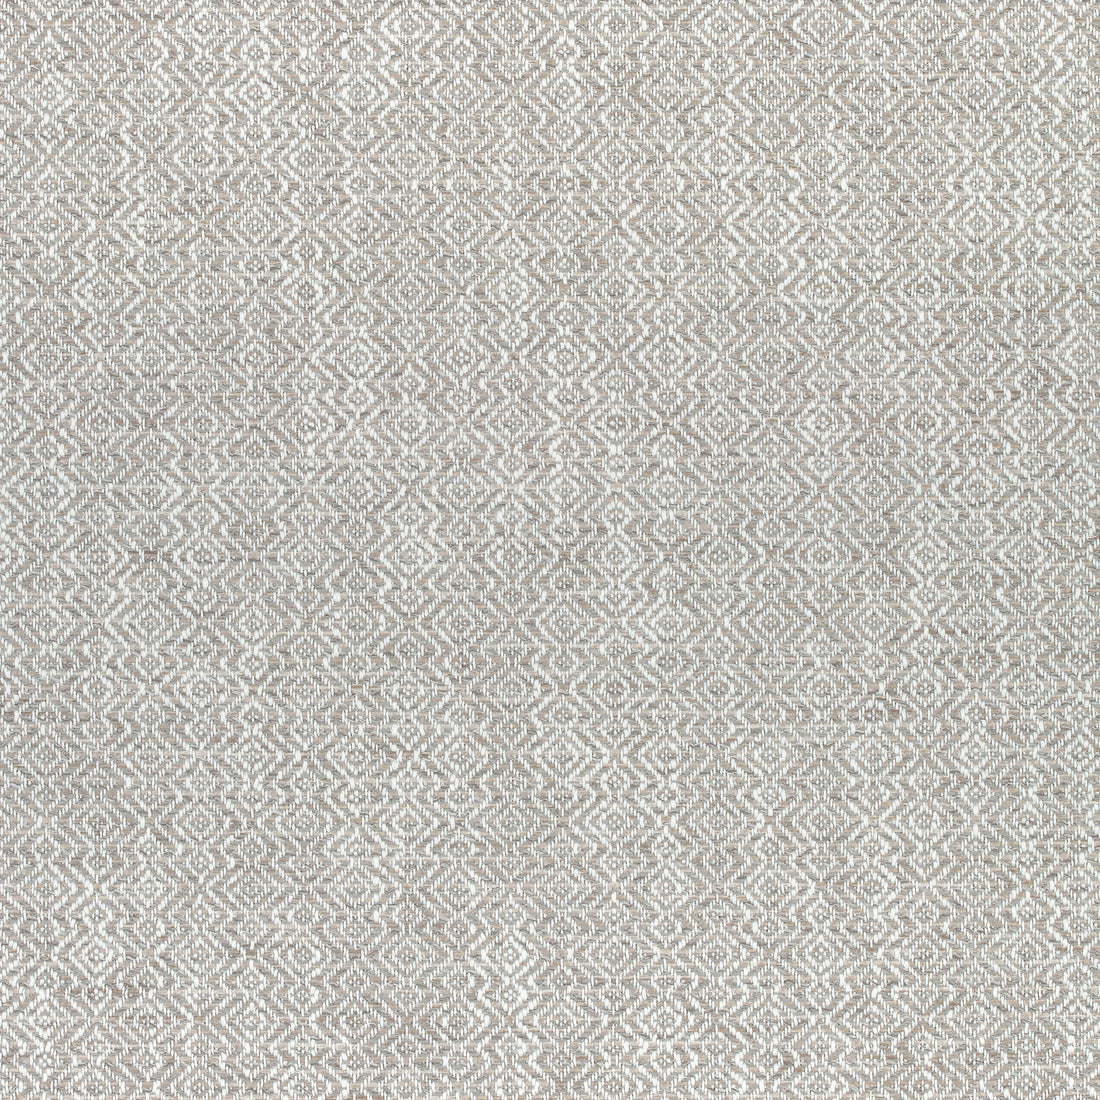 Kingsley fabric in sterling color - pattern number W74073 - by Thibaut in the Cadence collection